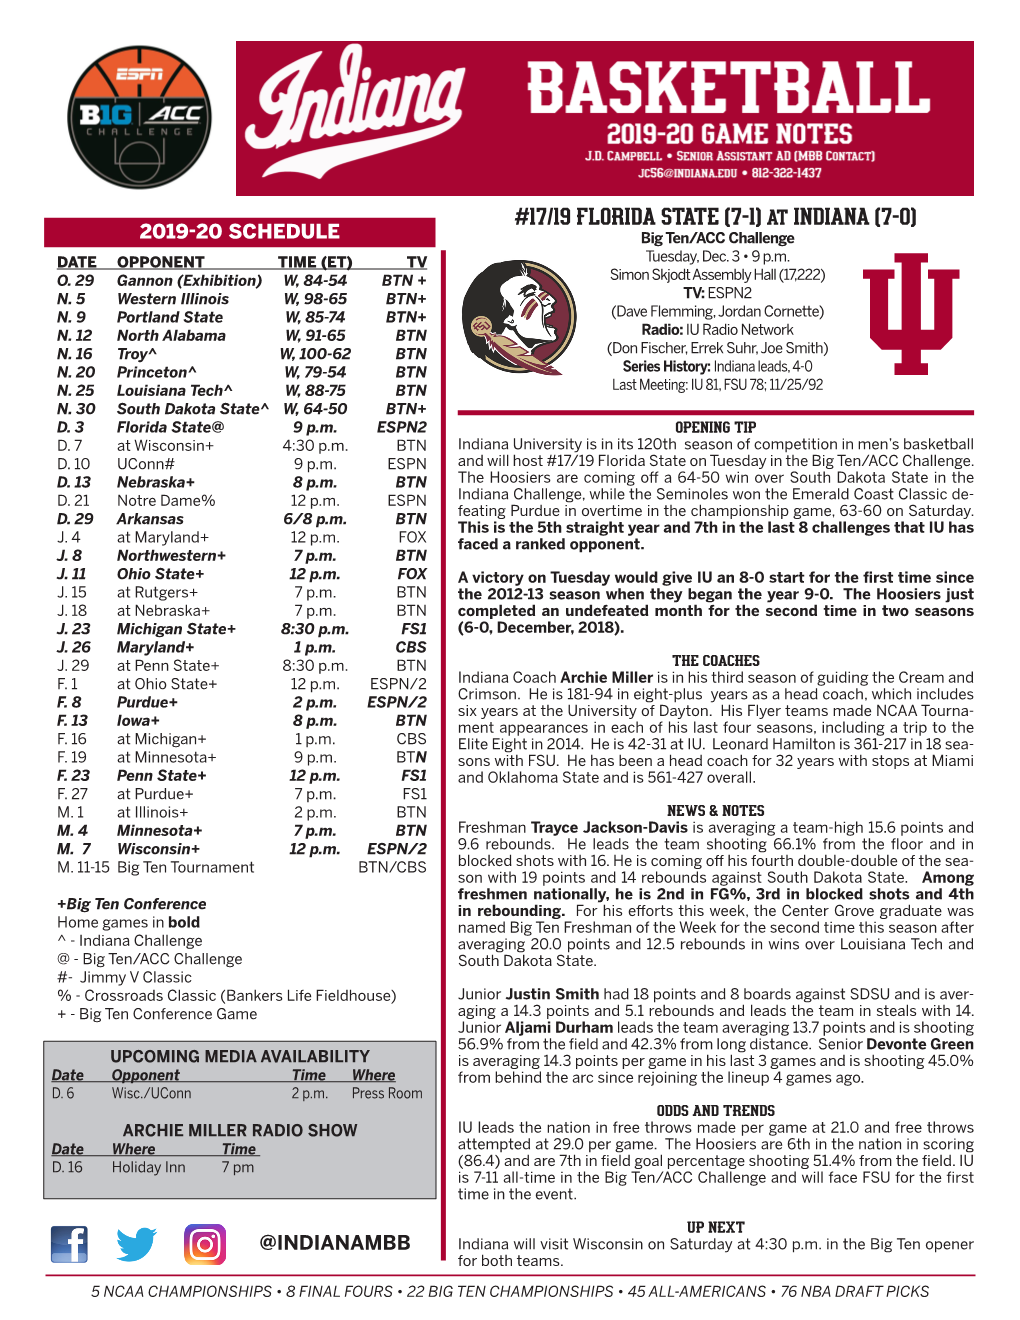 17/19 FLORIDA STATE (7-1) at INDIANA (7-0) 2019-20 SCHEDULE Big Ten/ACC Challenge DATE OPPONENT TIME (ET) TV Tuesday, Dec